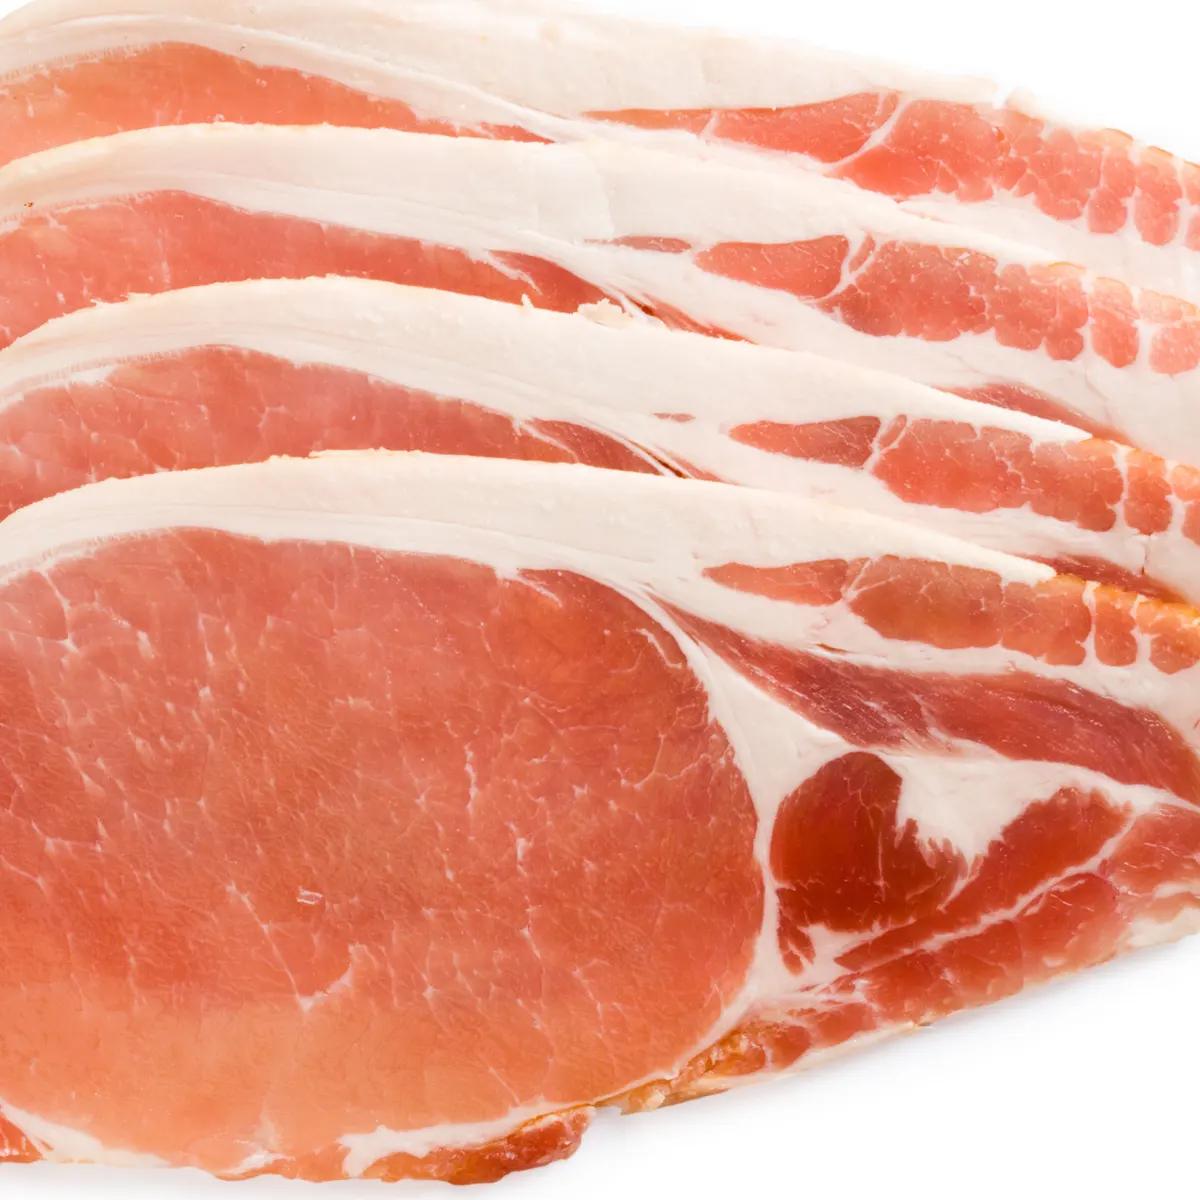 is smoked ham processed meat - What is the least processed meat